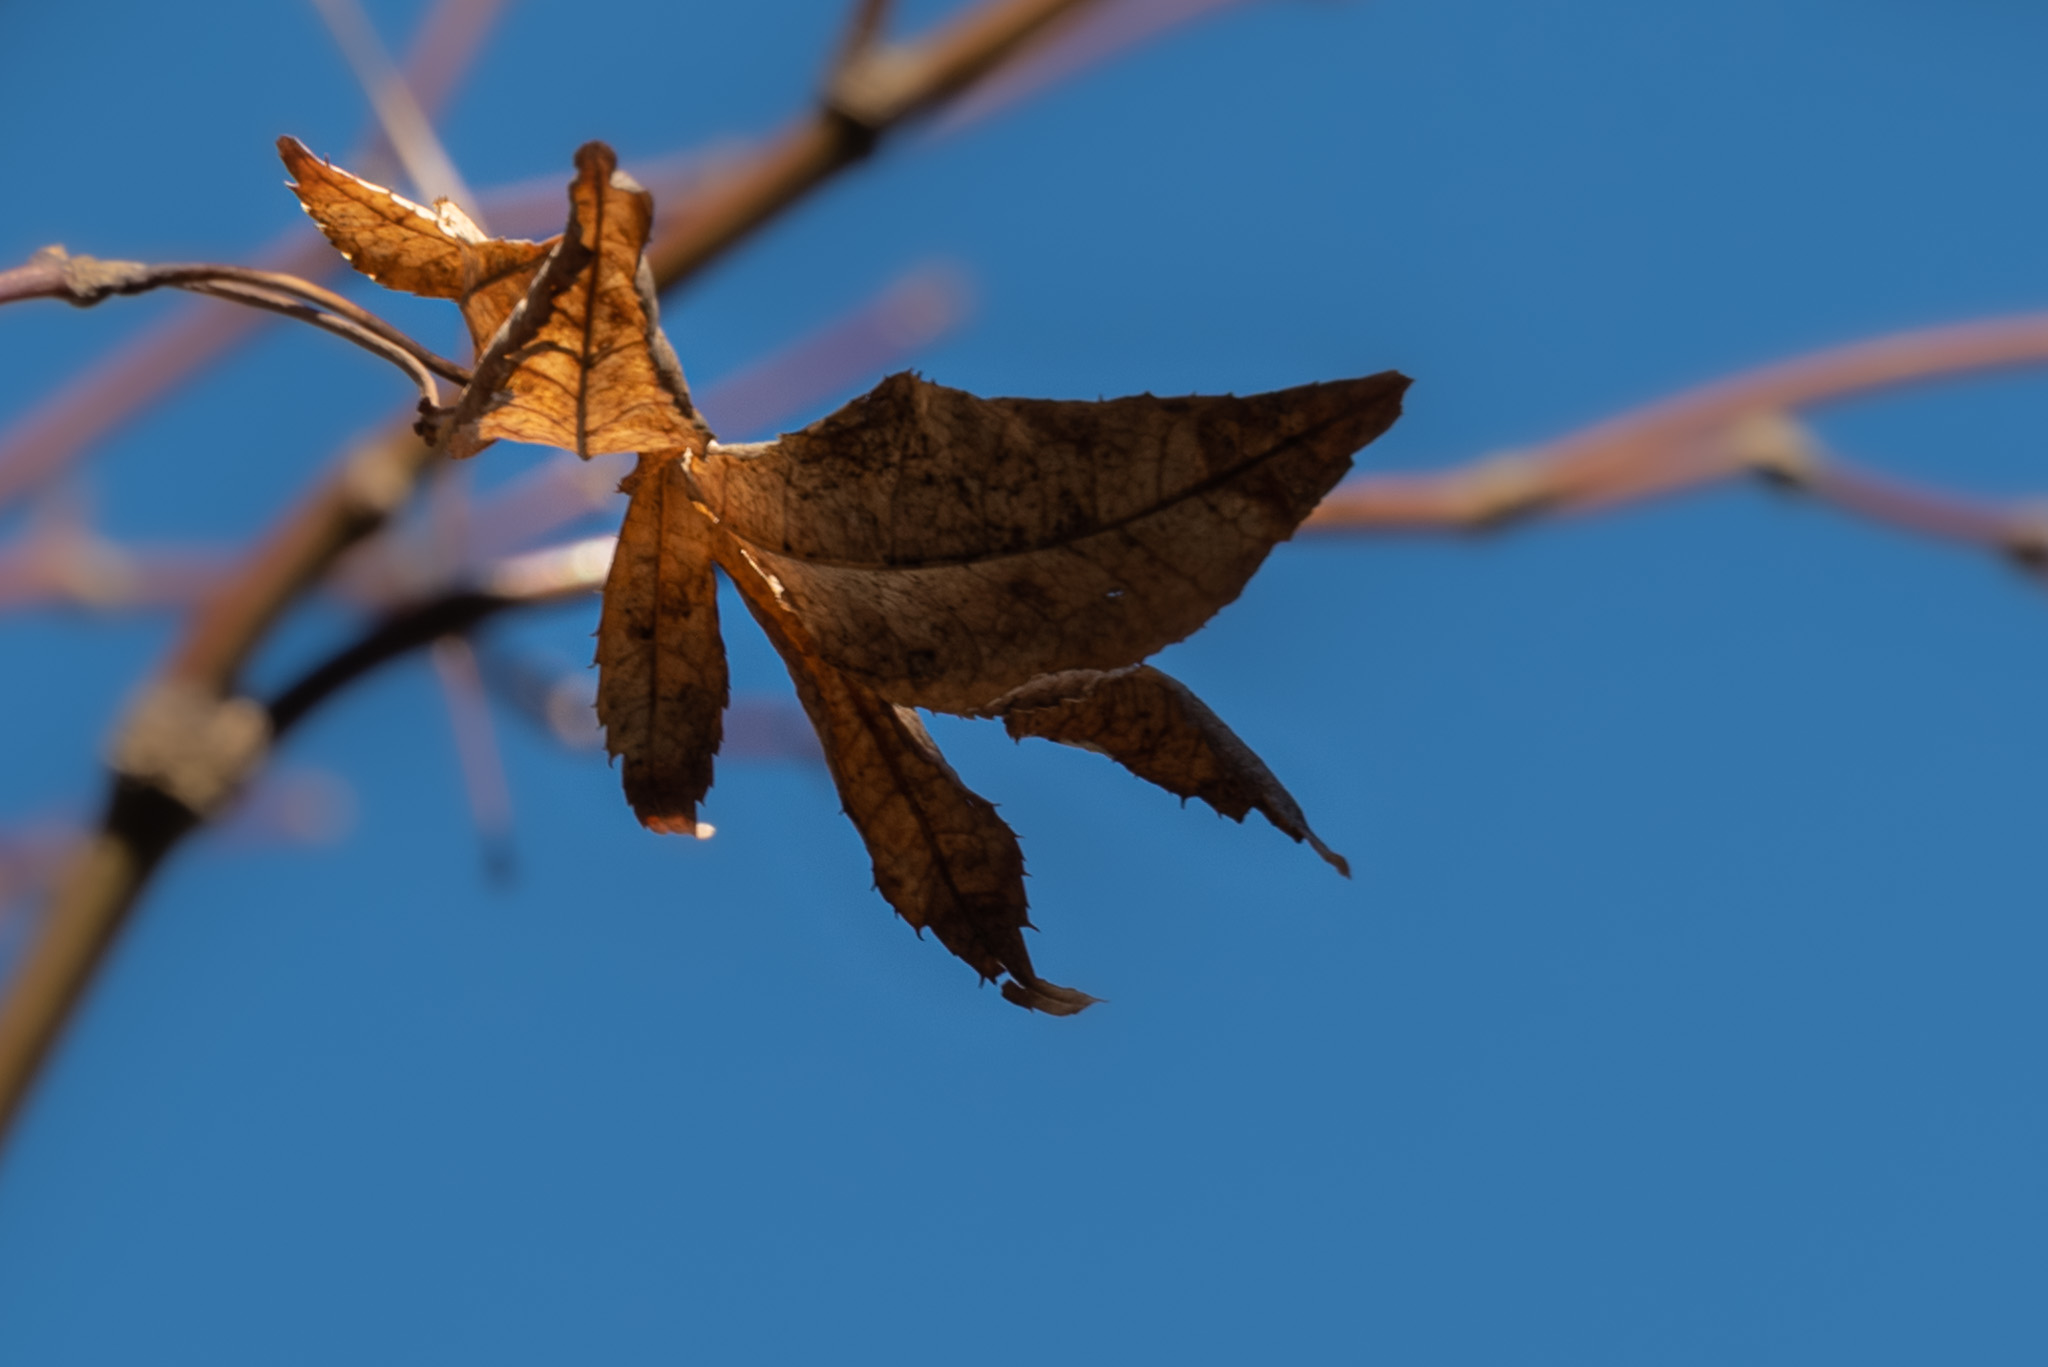 A single leaf clings to a branch against a brilliant blue sky